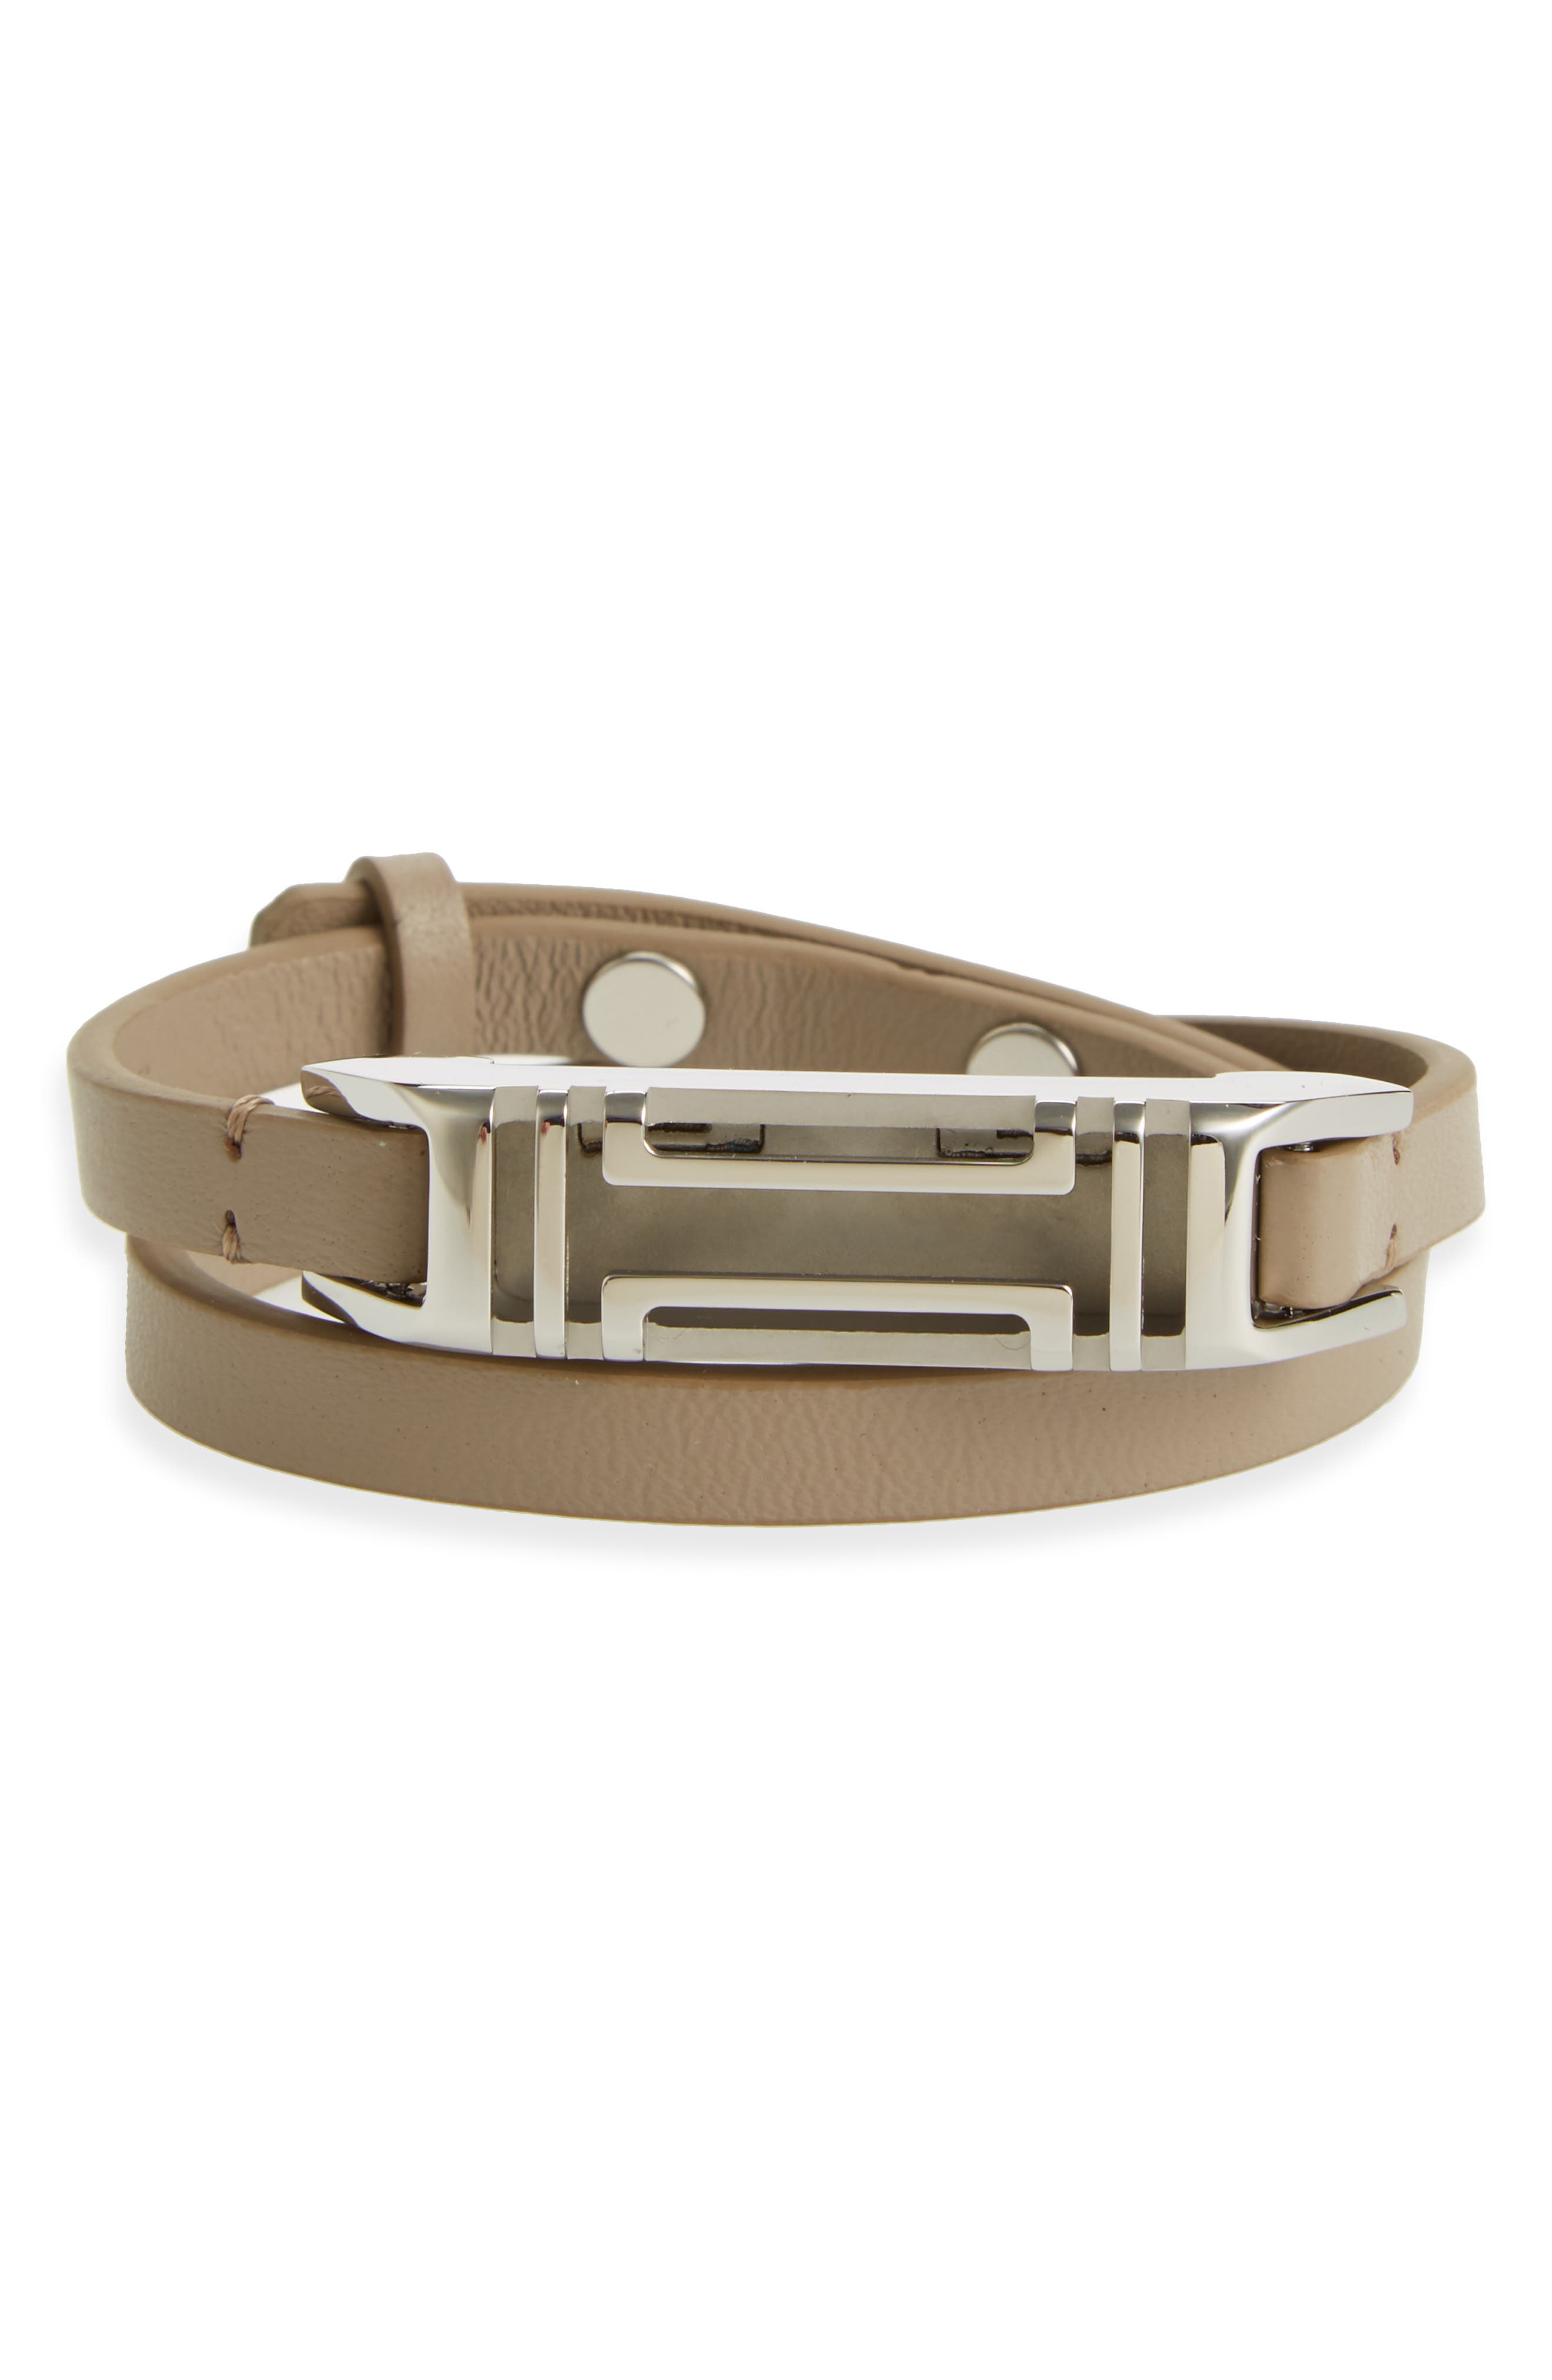 tory burch fitbit band